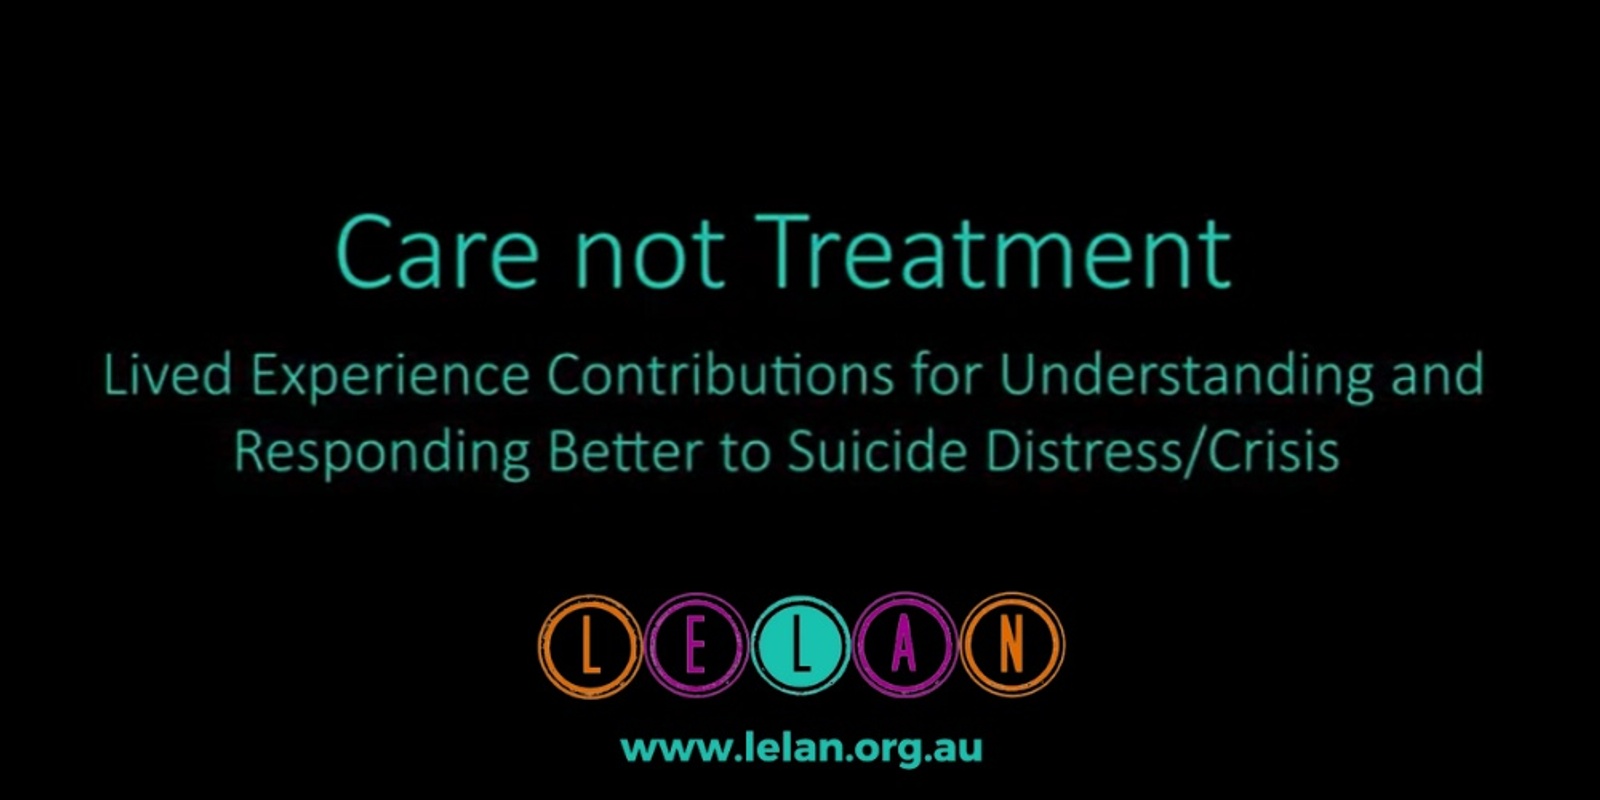 Banner image for ‘Care not Treatment’ Online Seminar: Direct insights from people with lived experience of suicide distress and crisis